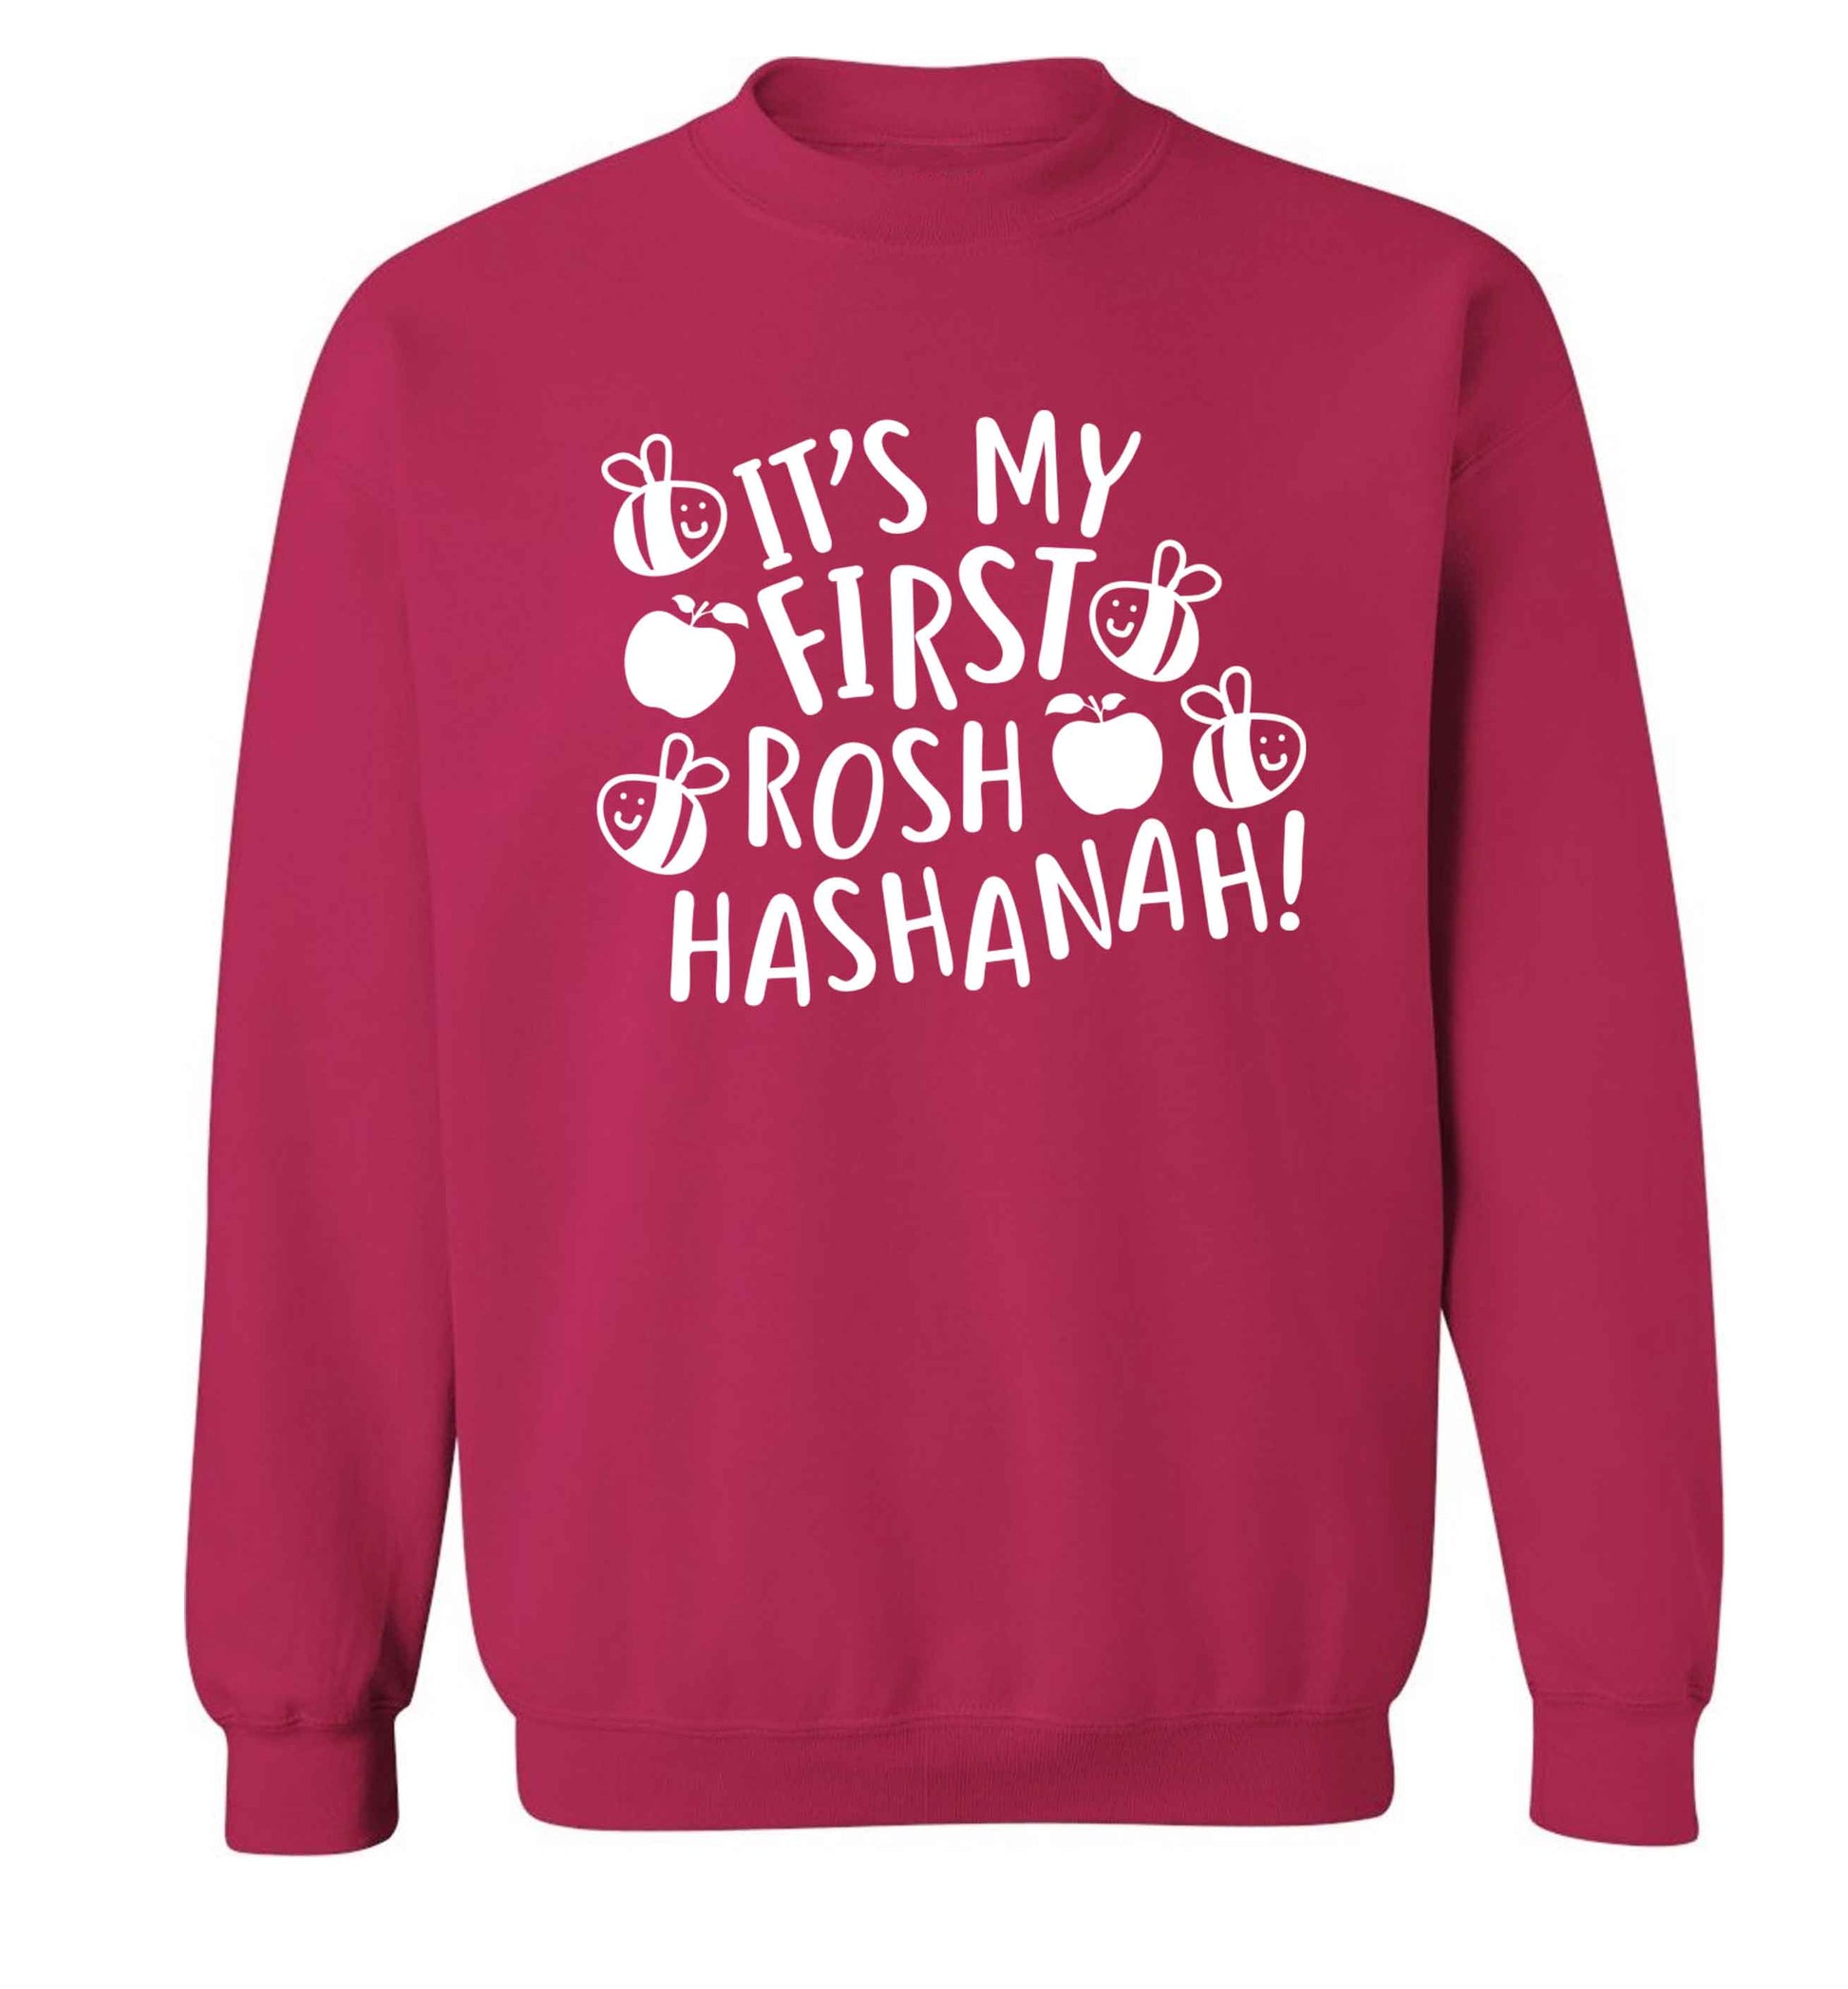 Its my first rosh hashanah Adult's unisex pink Sweater 2XL